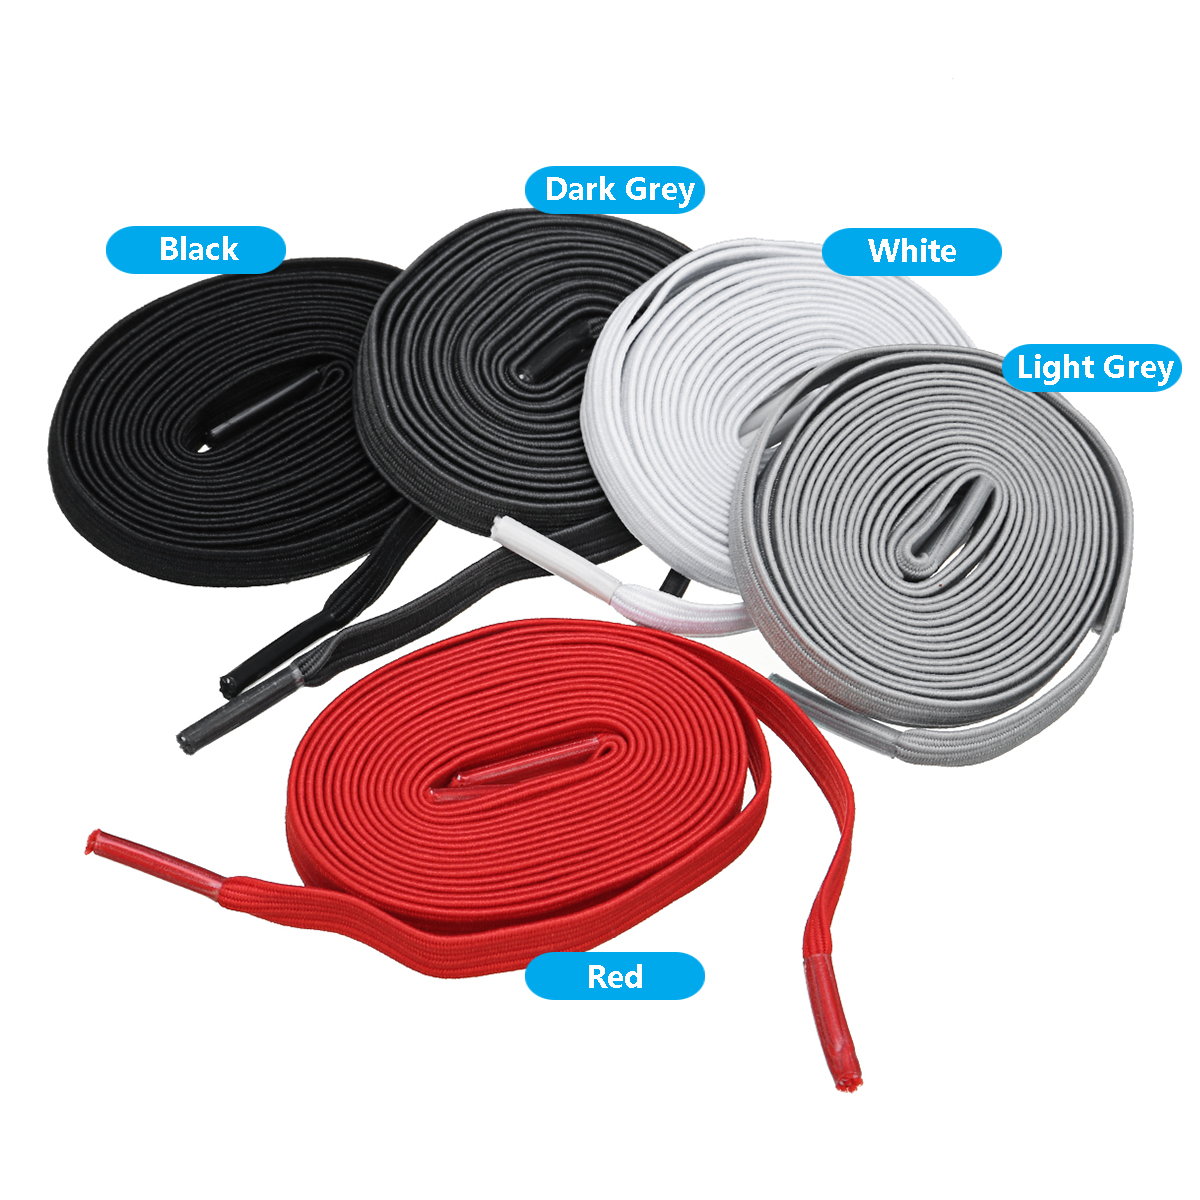 2Pcs-100cm-Elastic-No-Tie-Shoelaces-Lazy-Free-Tie-Sneaker-Laces-With-Buckles-Sports-Running-1470098-1